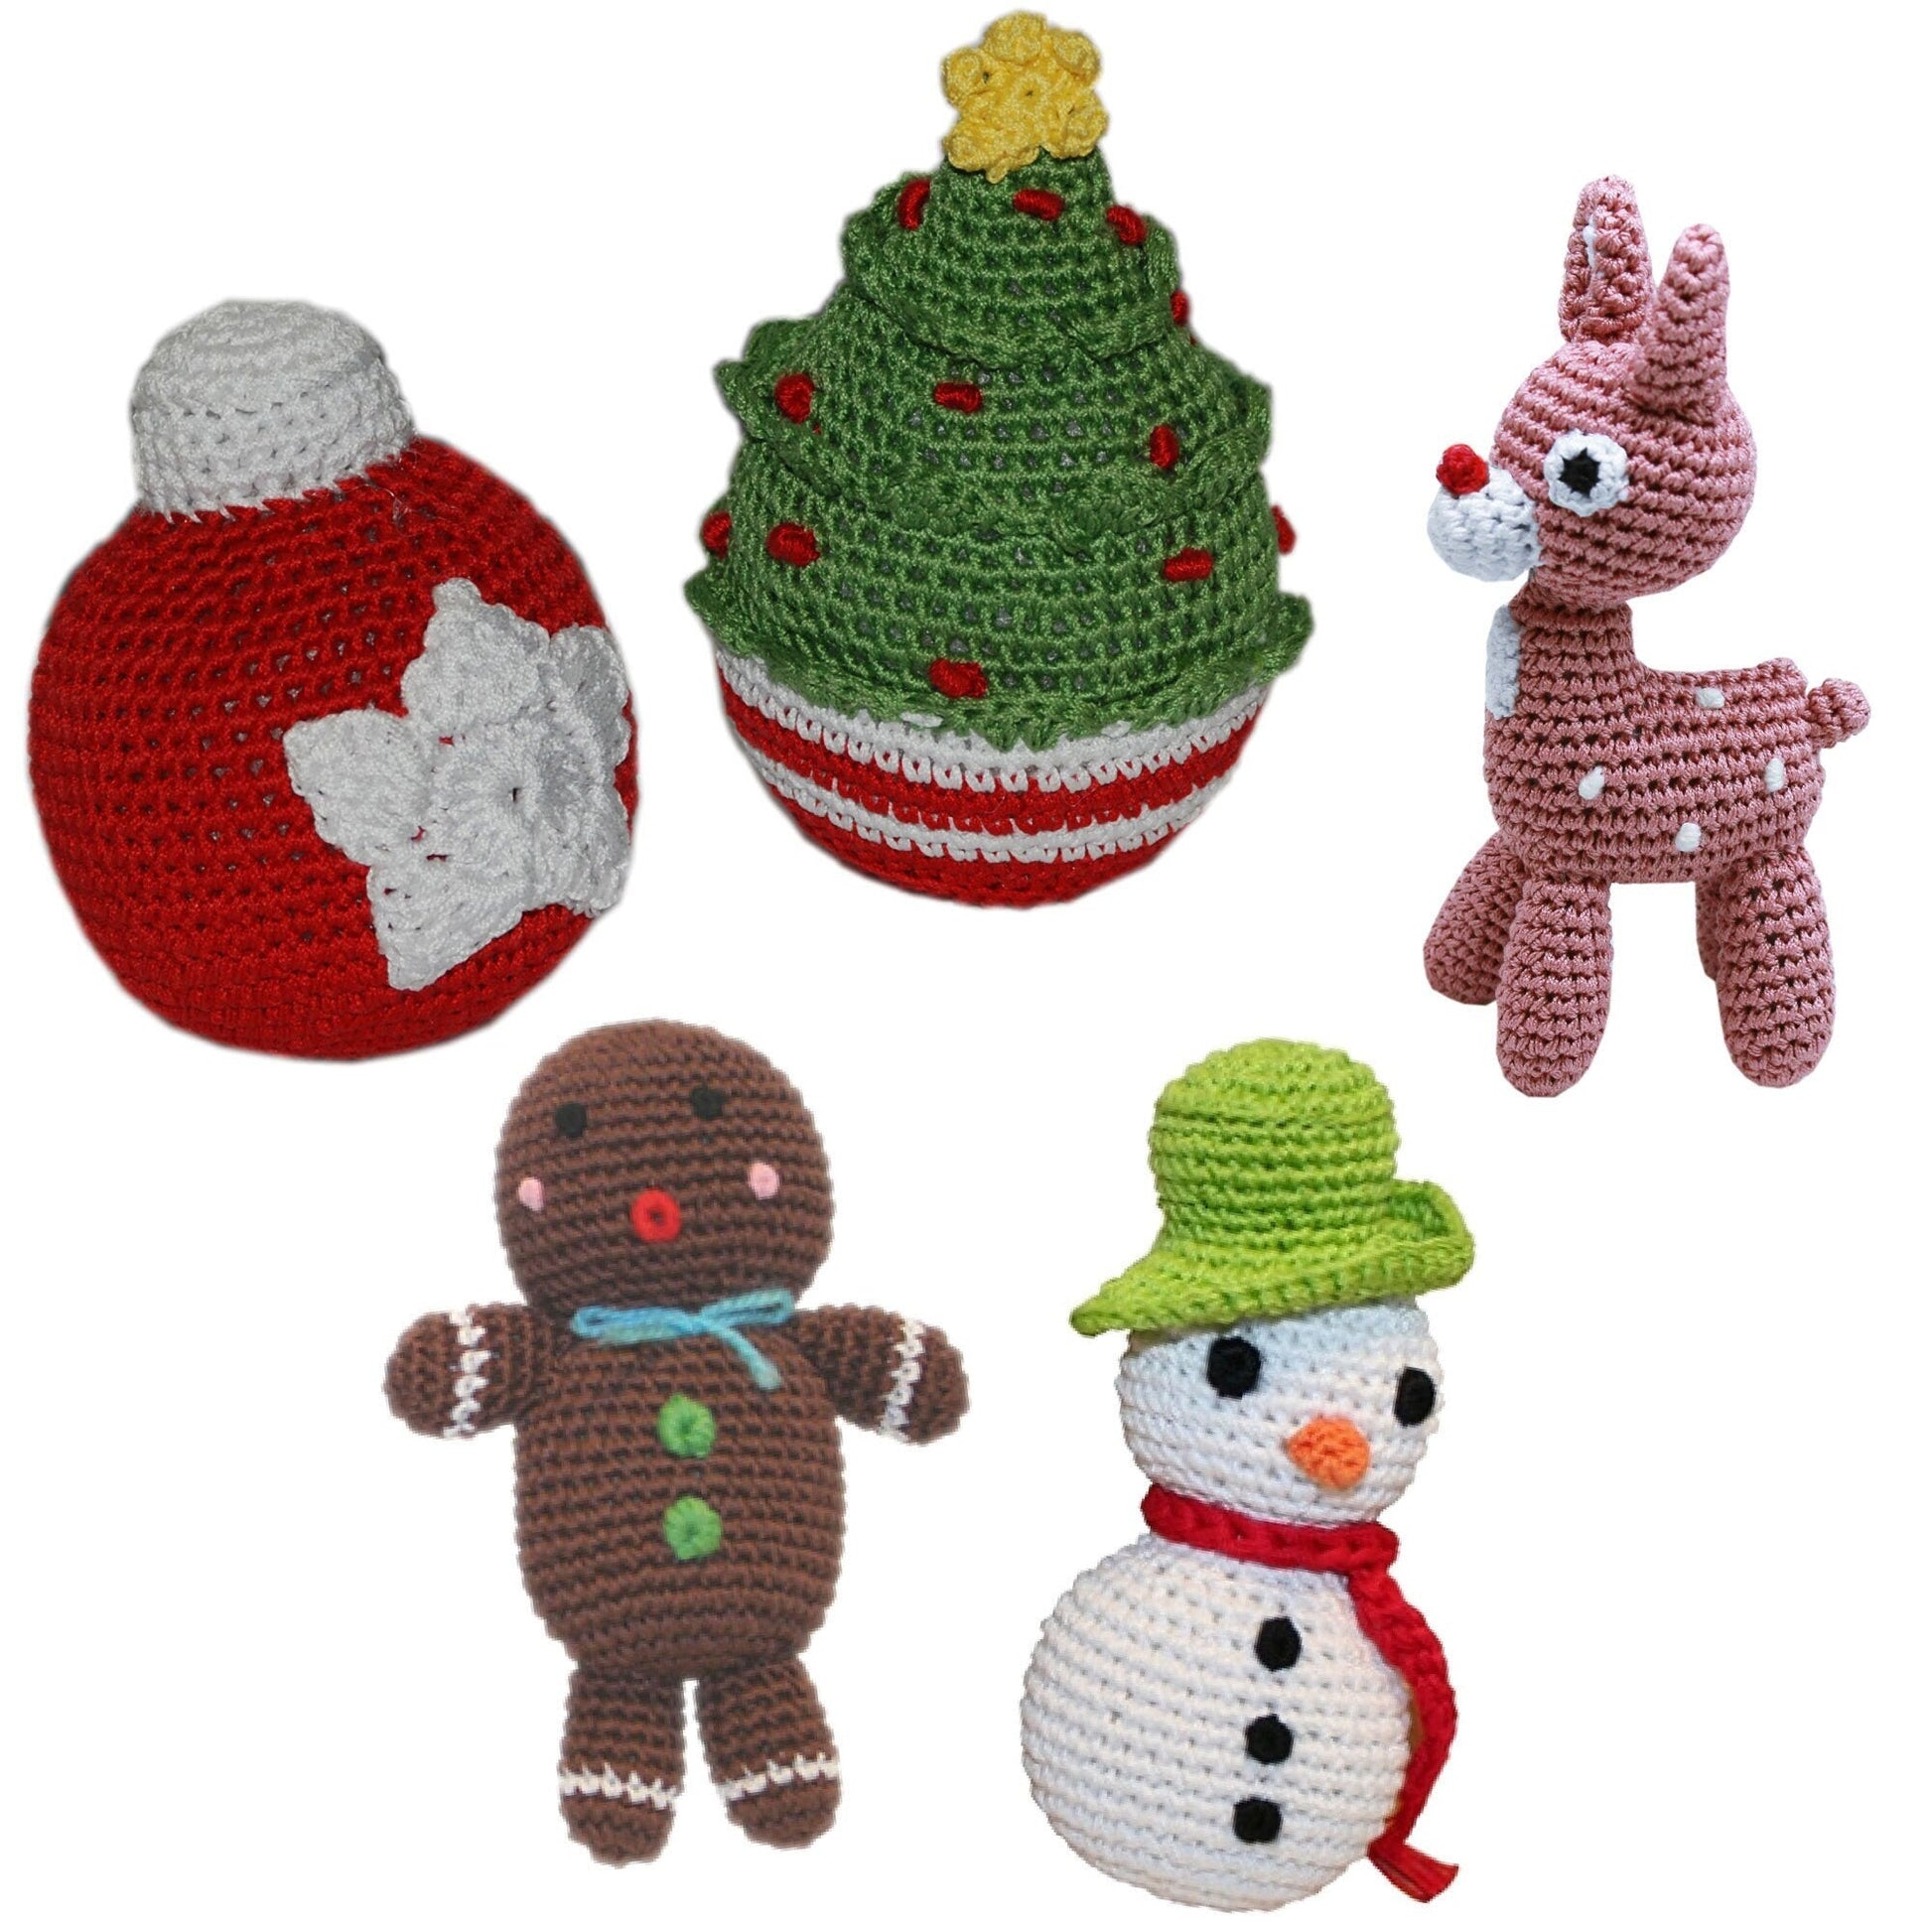 Knit Knacks Organic Cotton Pet& Dog Toys, "Christmas Group" (Choose from: Rudy Reindeer, Christmas Tree, Ornament, Snowman, Gingerbread Man)-0